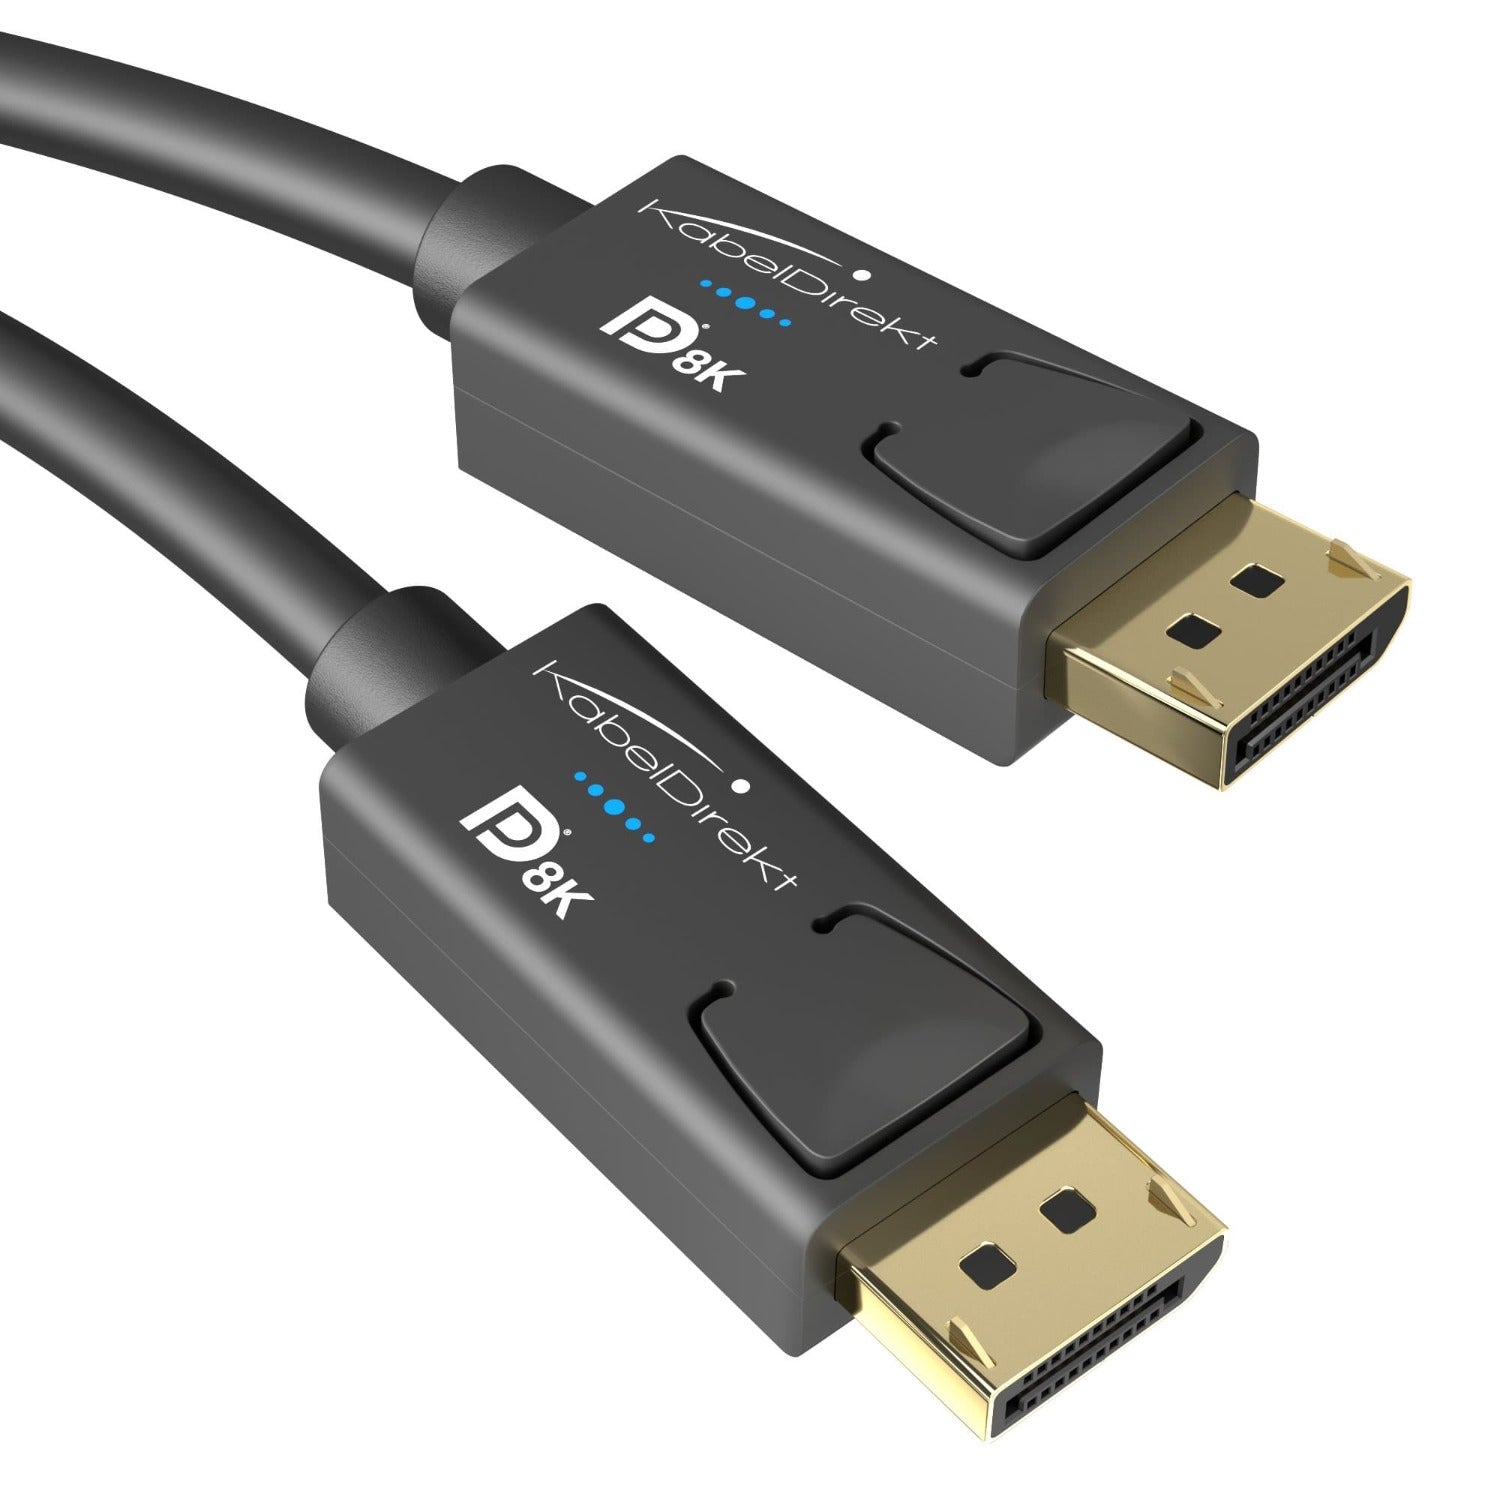 VESA Certified DisplayPort Cable - DP1.4 for 8K or gaming with up to 240Hz